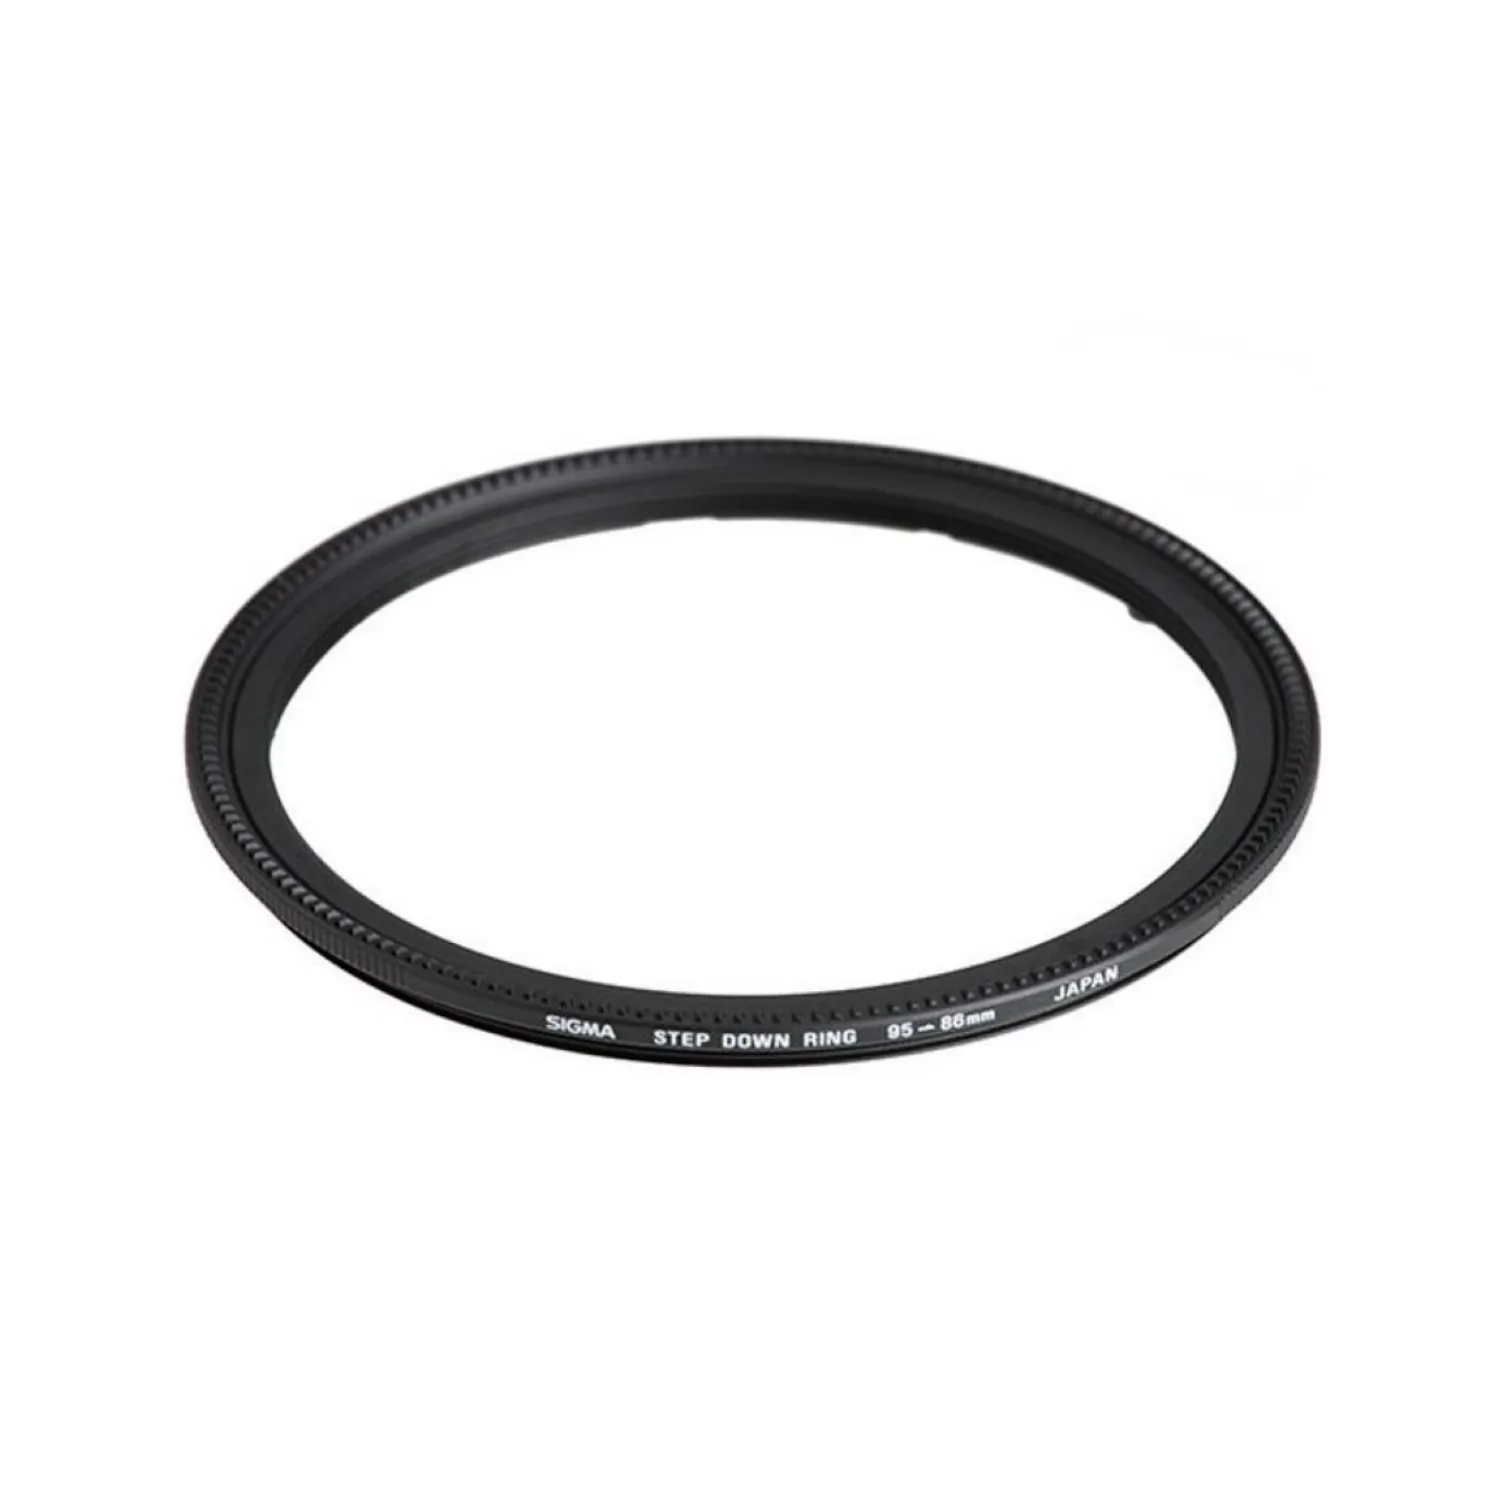 Sigma Step Down Ring for 50-500mmF4.5-6.3 APO DG OS HS